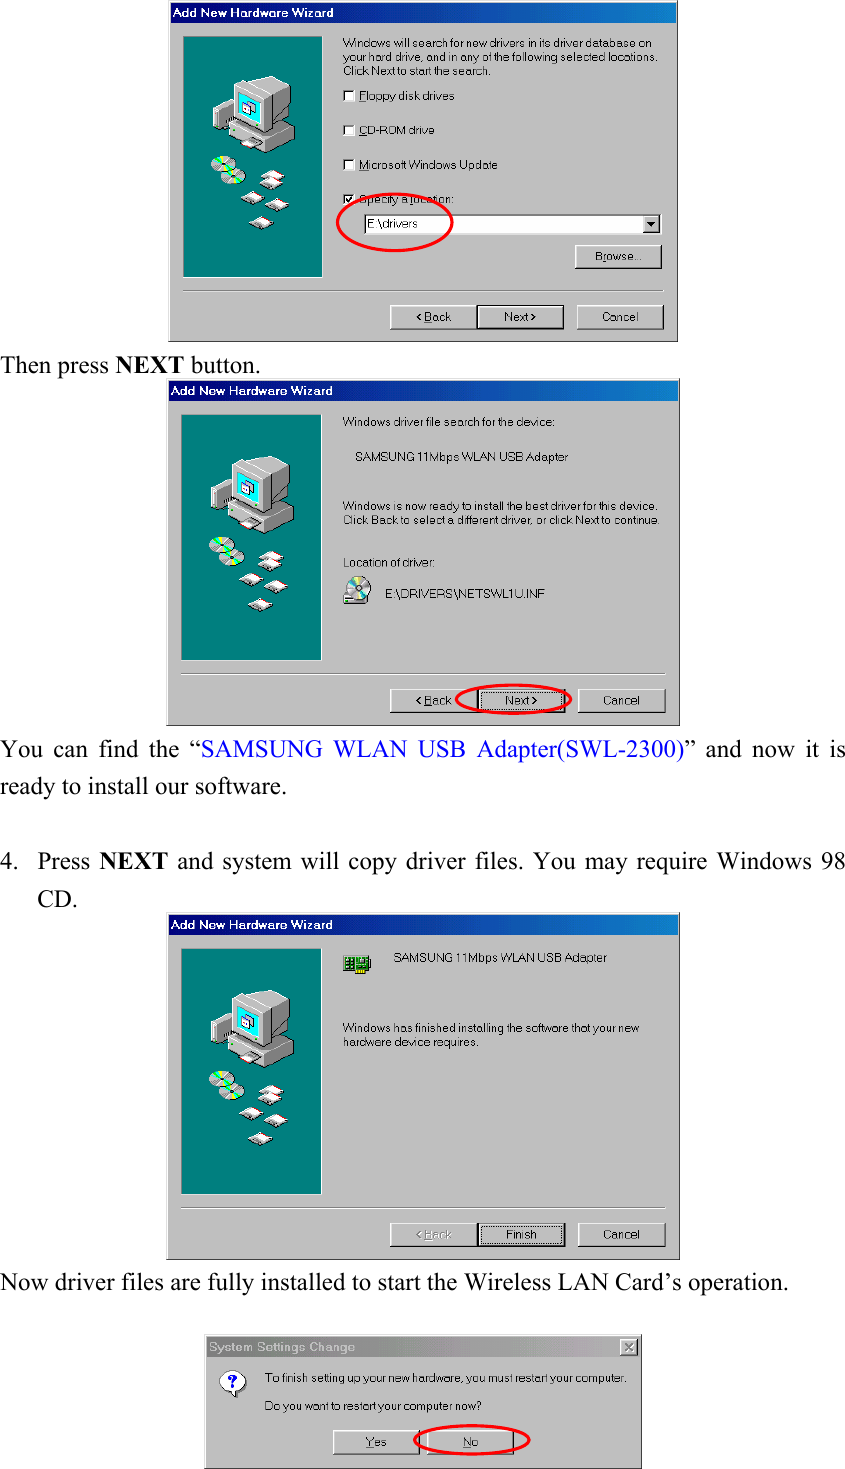   Then press NEXT button.  You can find the “SAMSUNG WLAN USB Adapter(SWL-2300)” and now it is ready to install our software.   4. Press NEXT and system will copy driver files. You may require Windows 98 CD.  Now driver files are fully installed to start the Wireless LAN Card’s operation.   